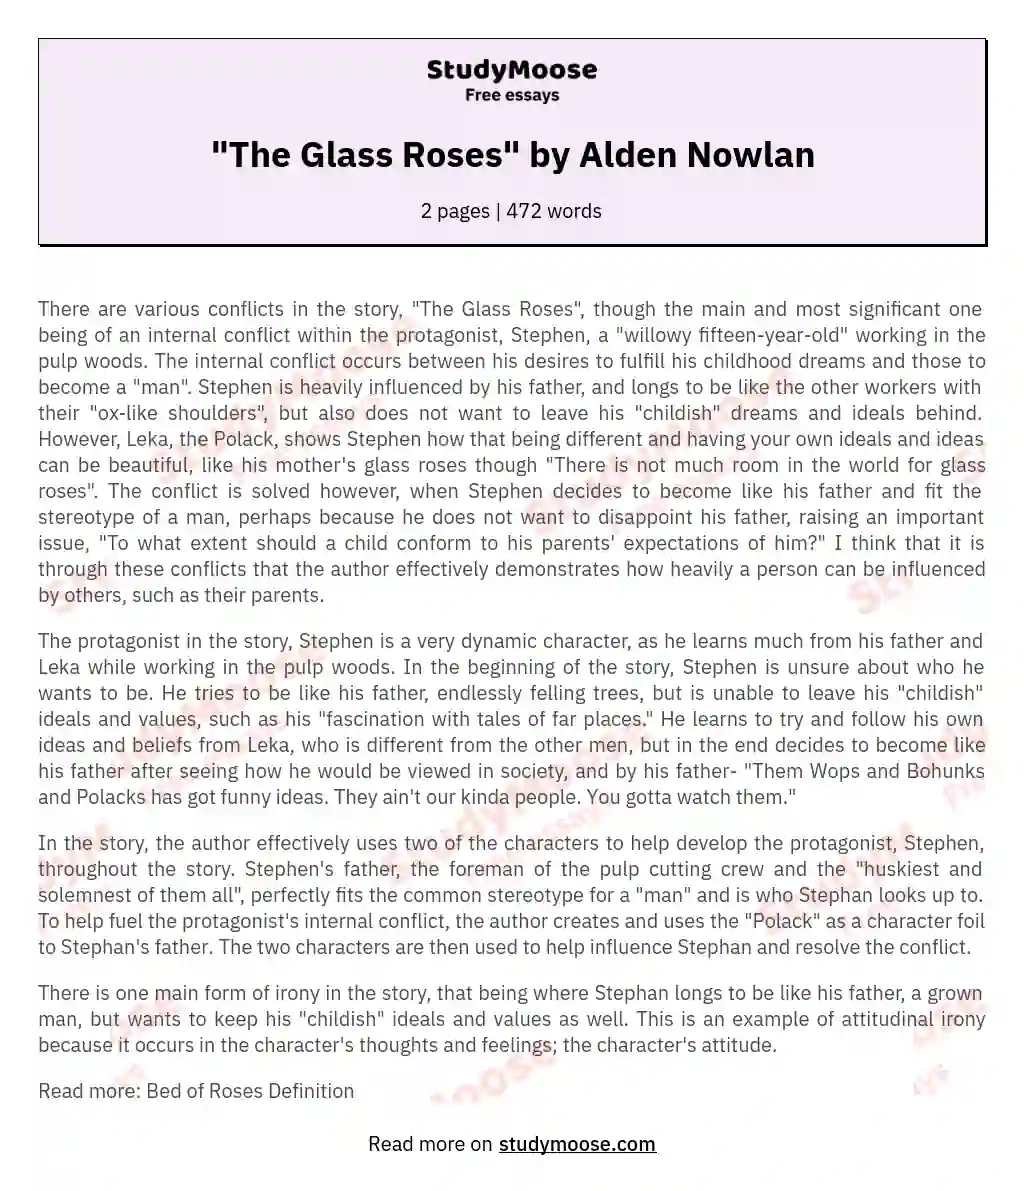 essay on the glass roses